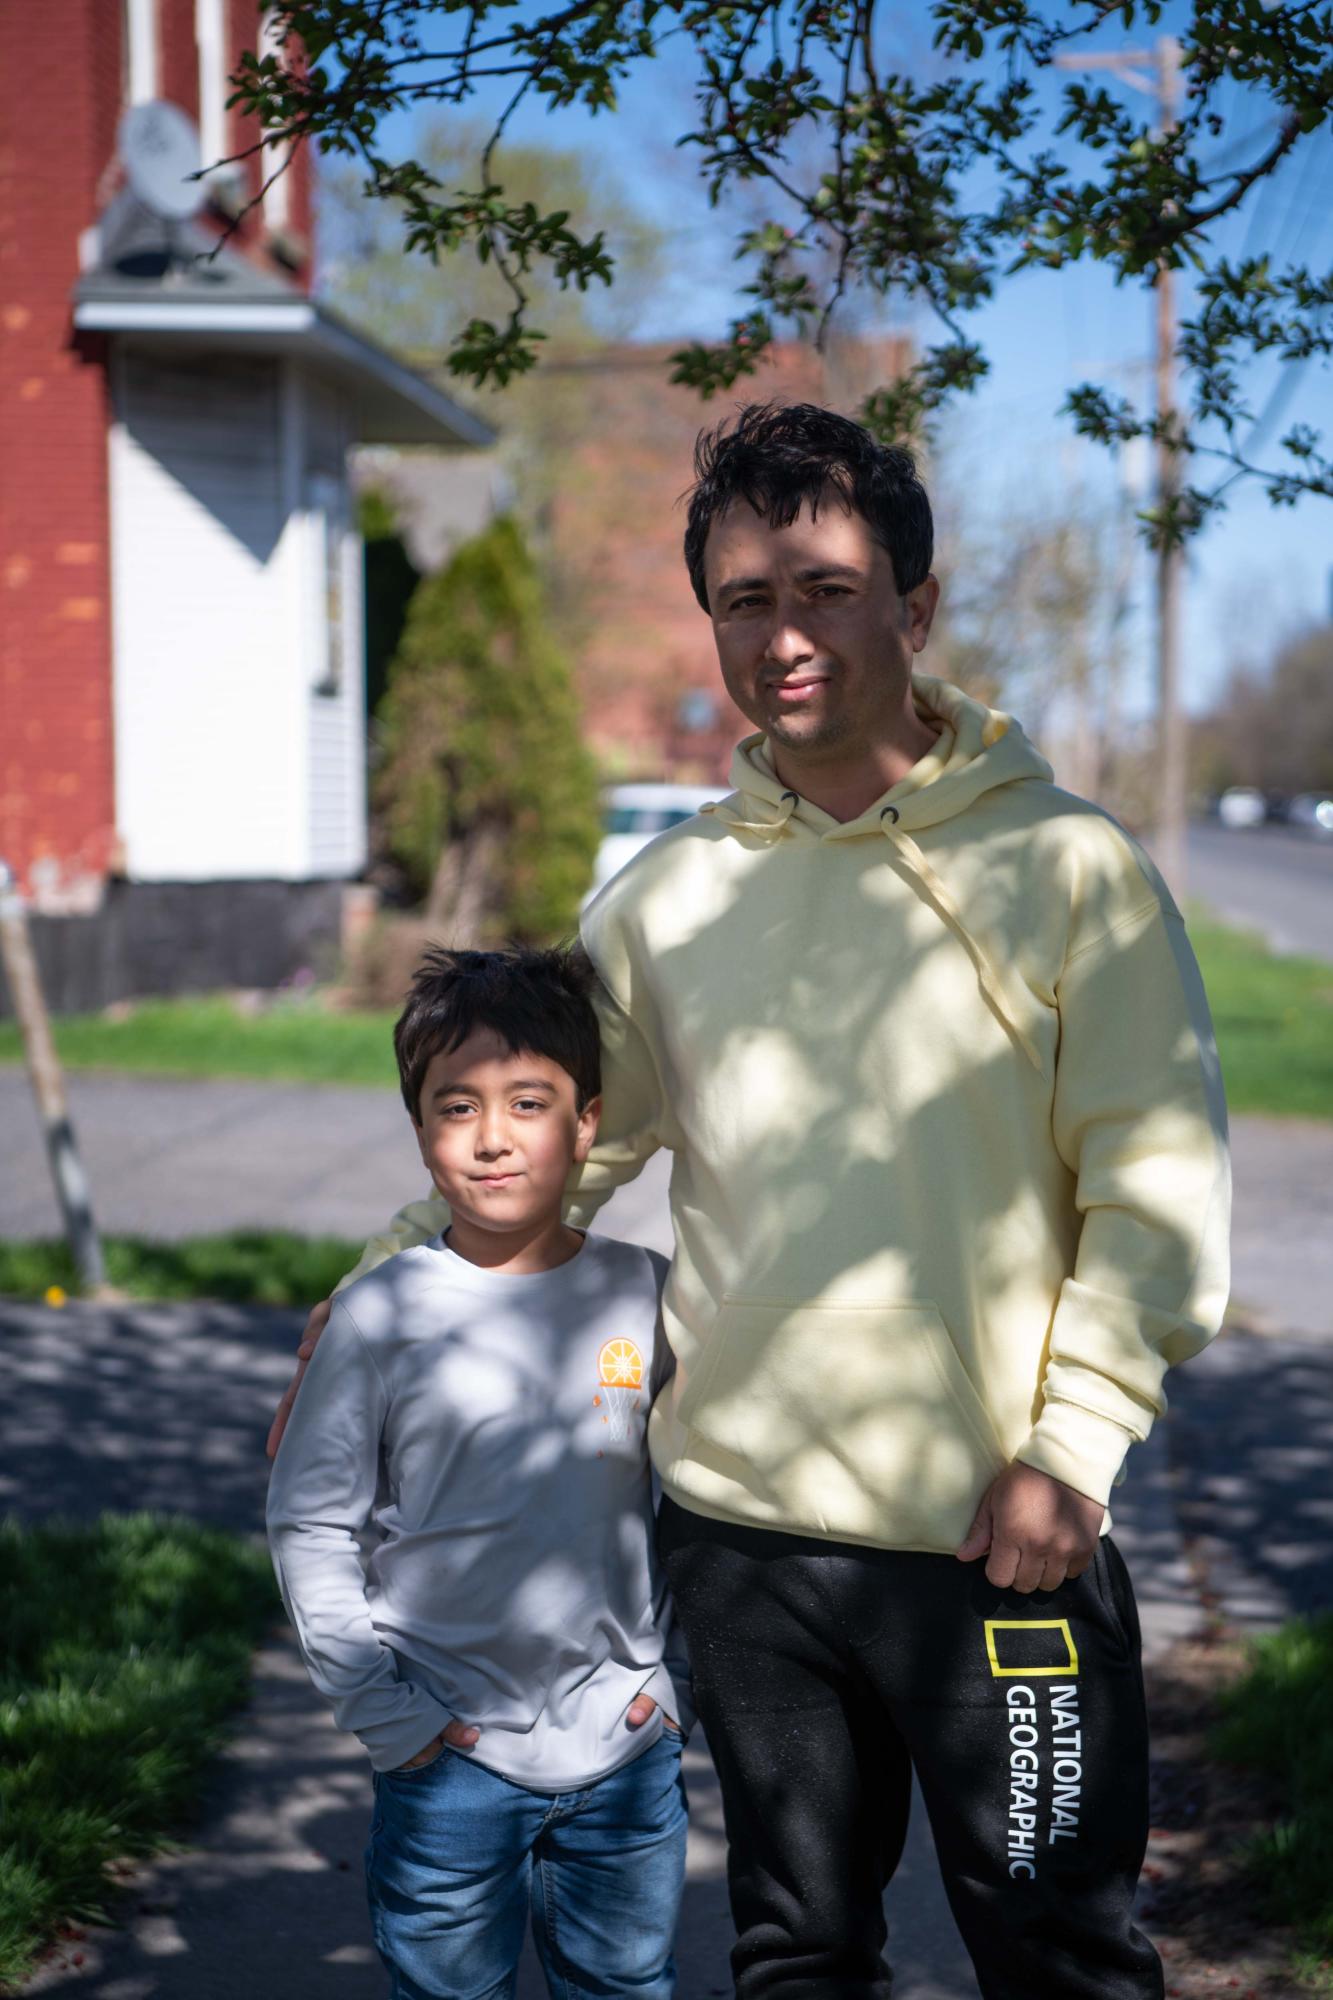 Portraits - Nazif with his son. Ben Cleeton for Central New York...